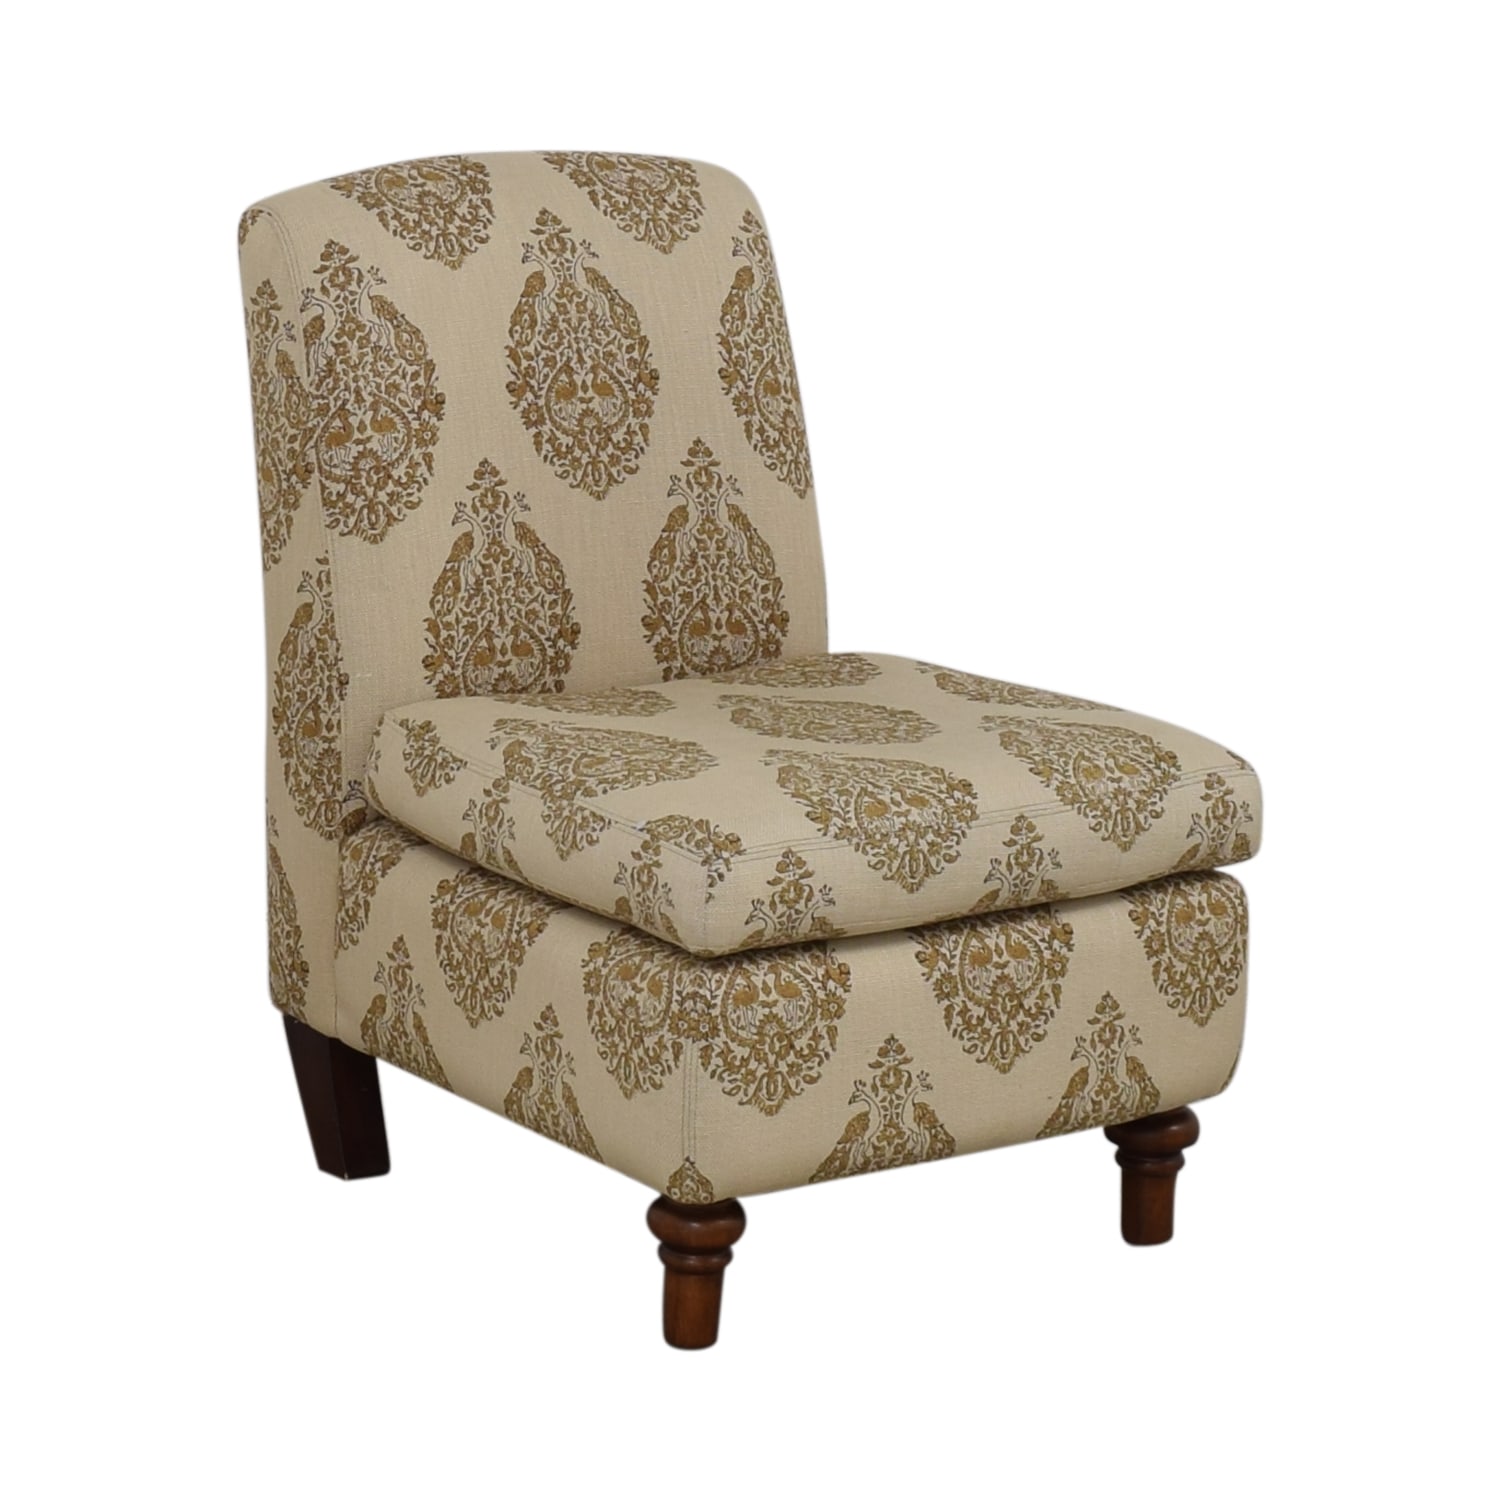 buy Pottery Barn Beige Upholstered Chair Pottery Barn Chairs